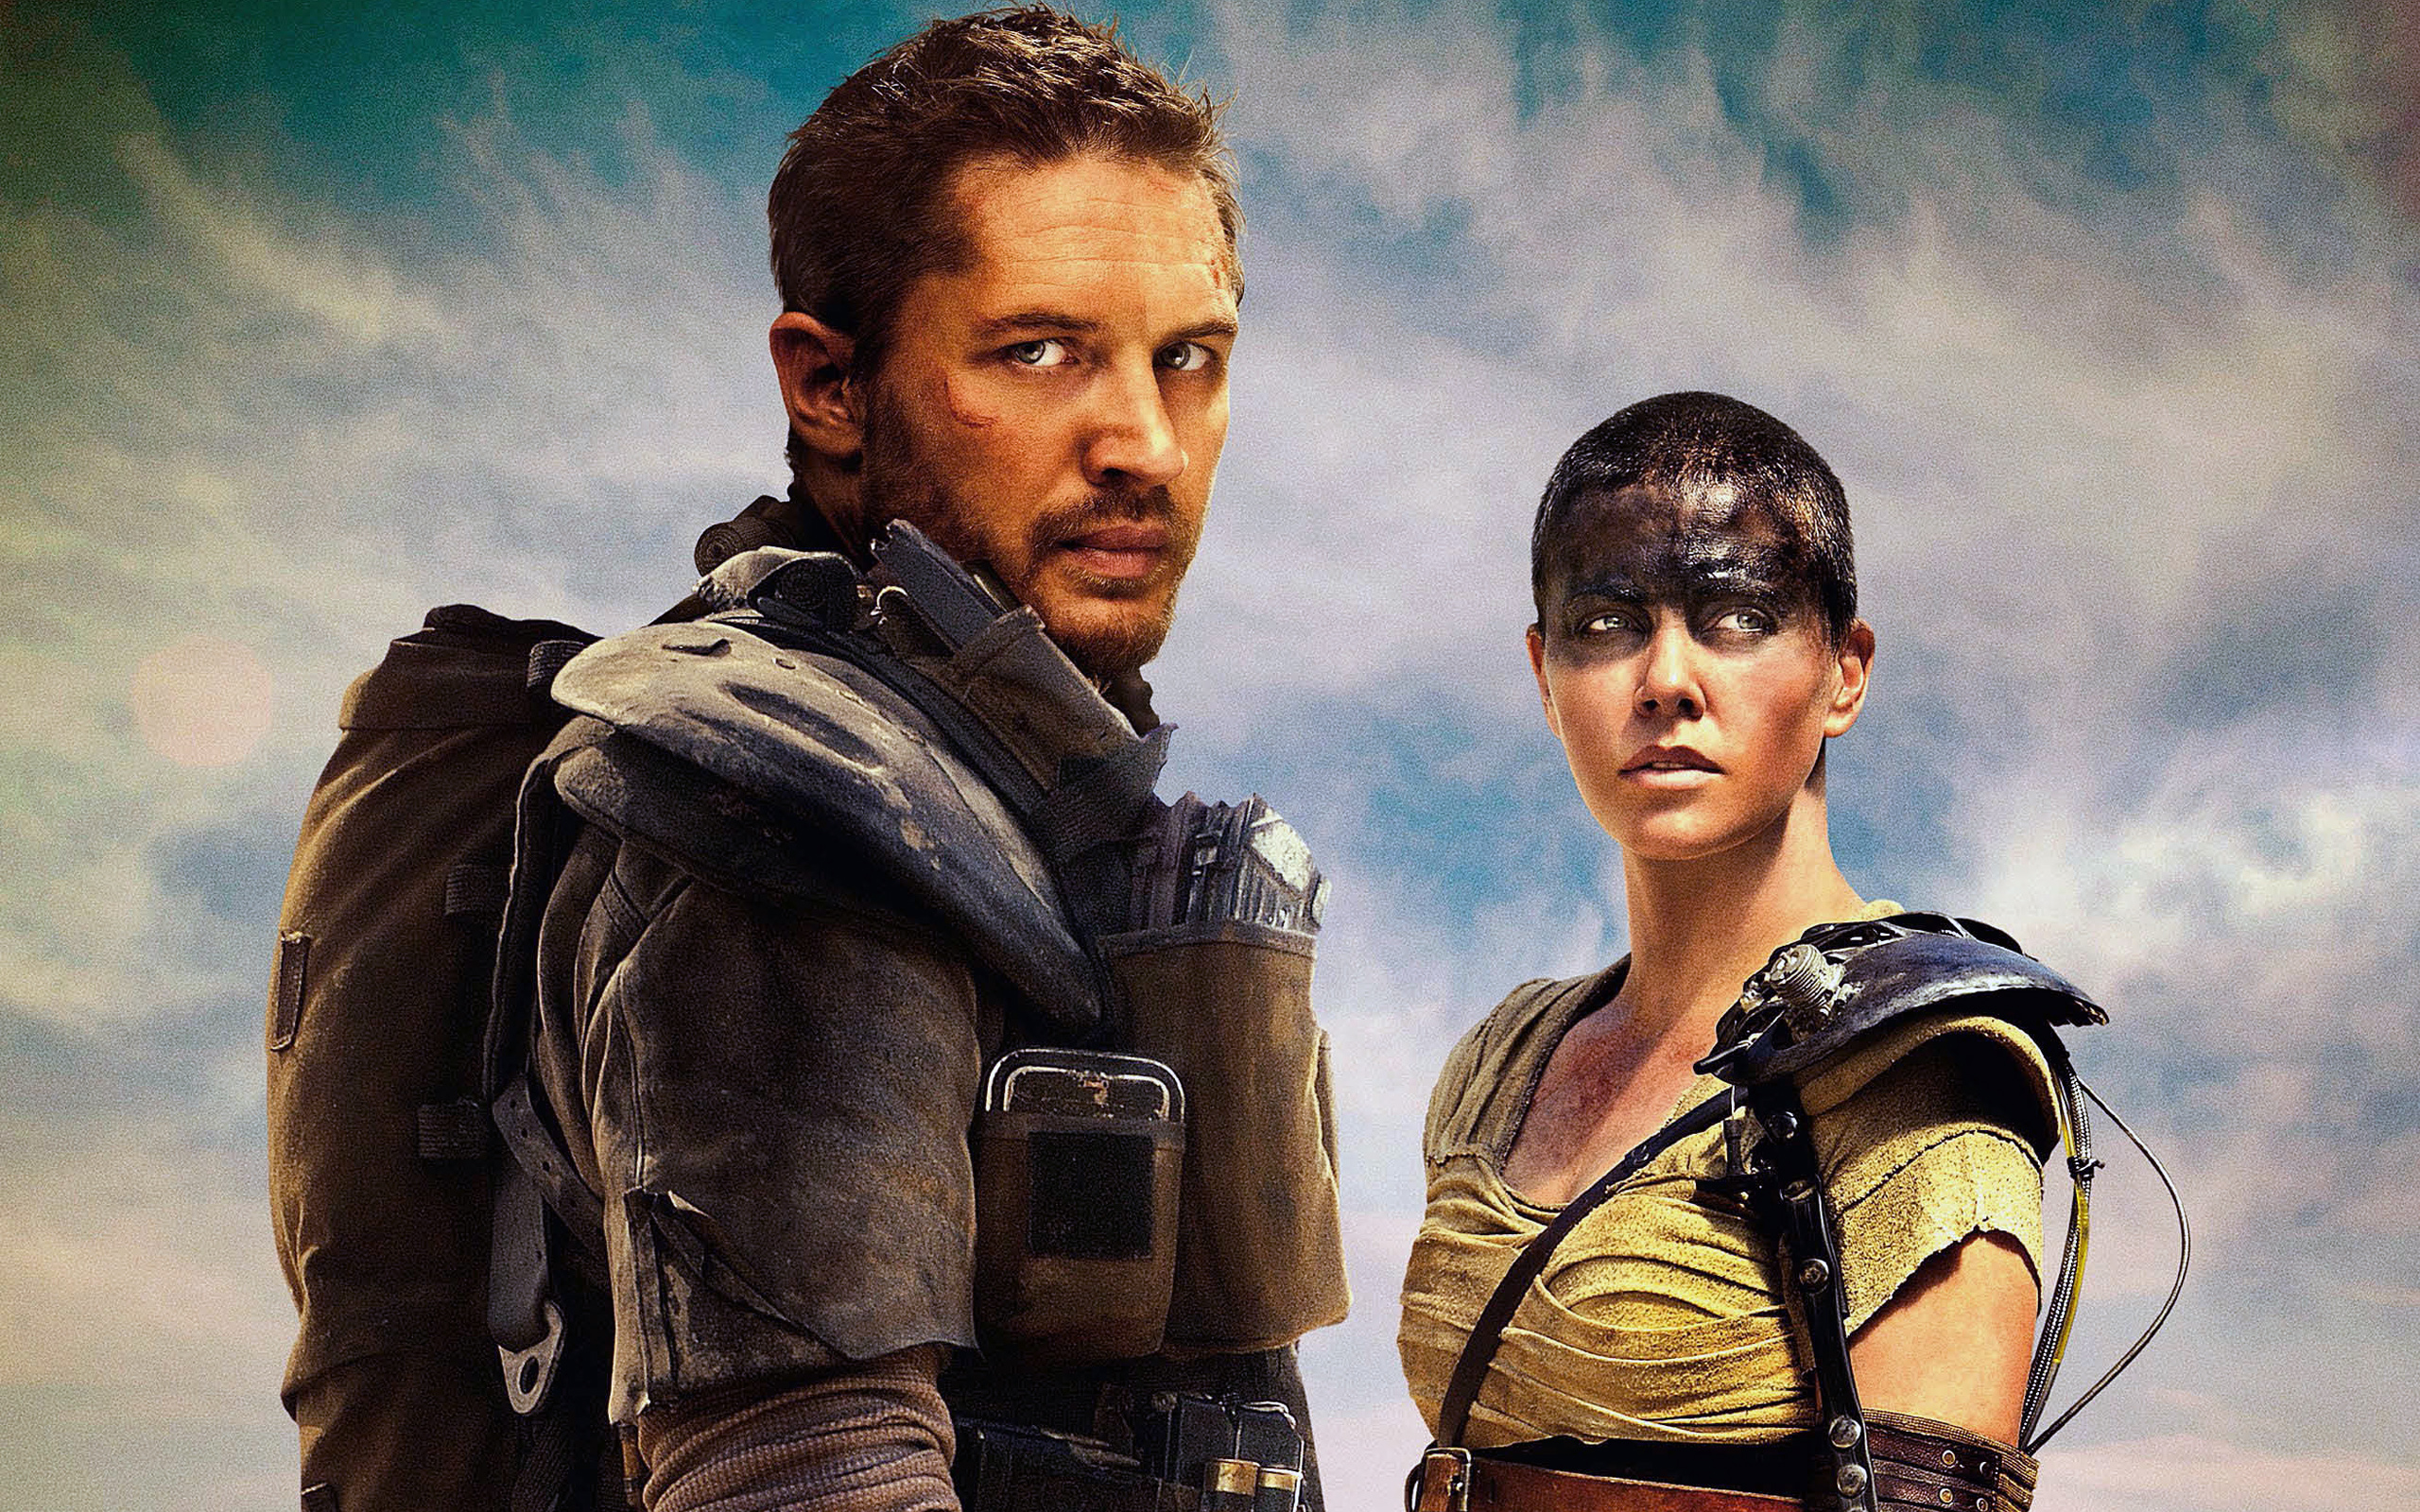 NOTE: The following contains spoilers for MAD MAX: FURY ROAD. If you do not wish to be spoiled, please stop reading now. If reading network notes makes you ...